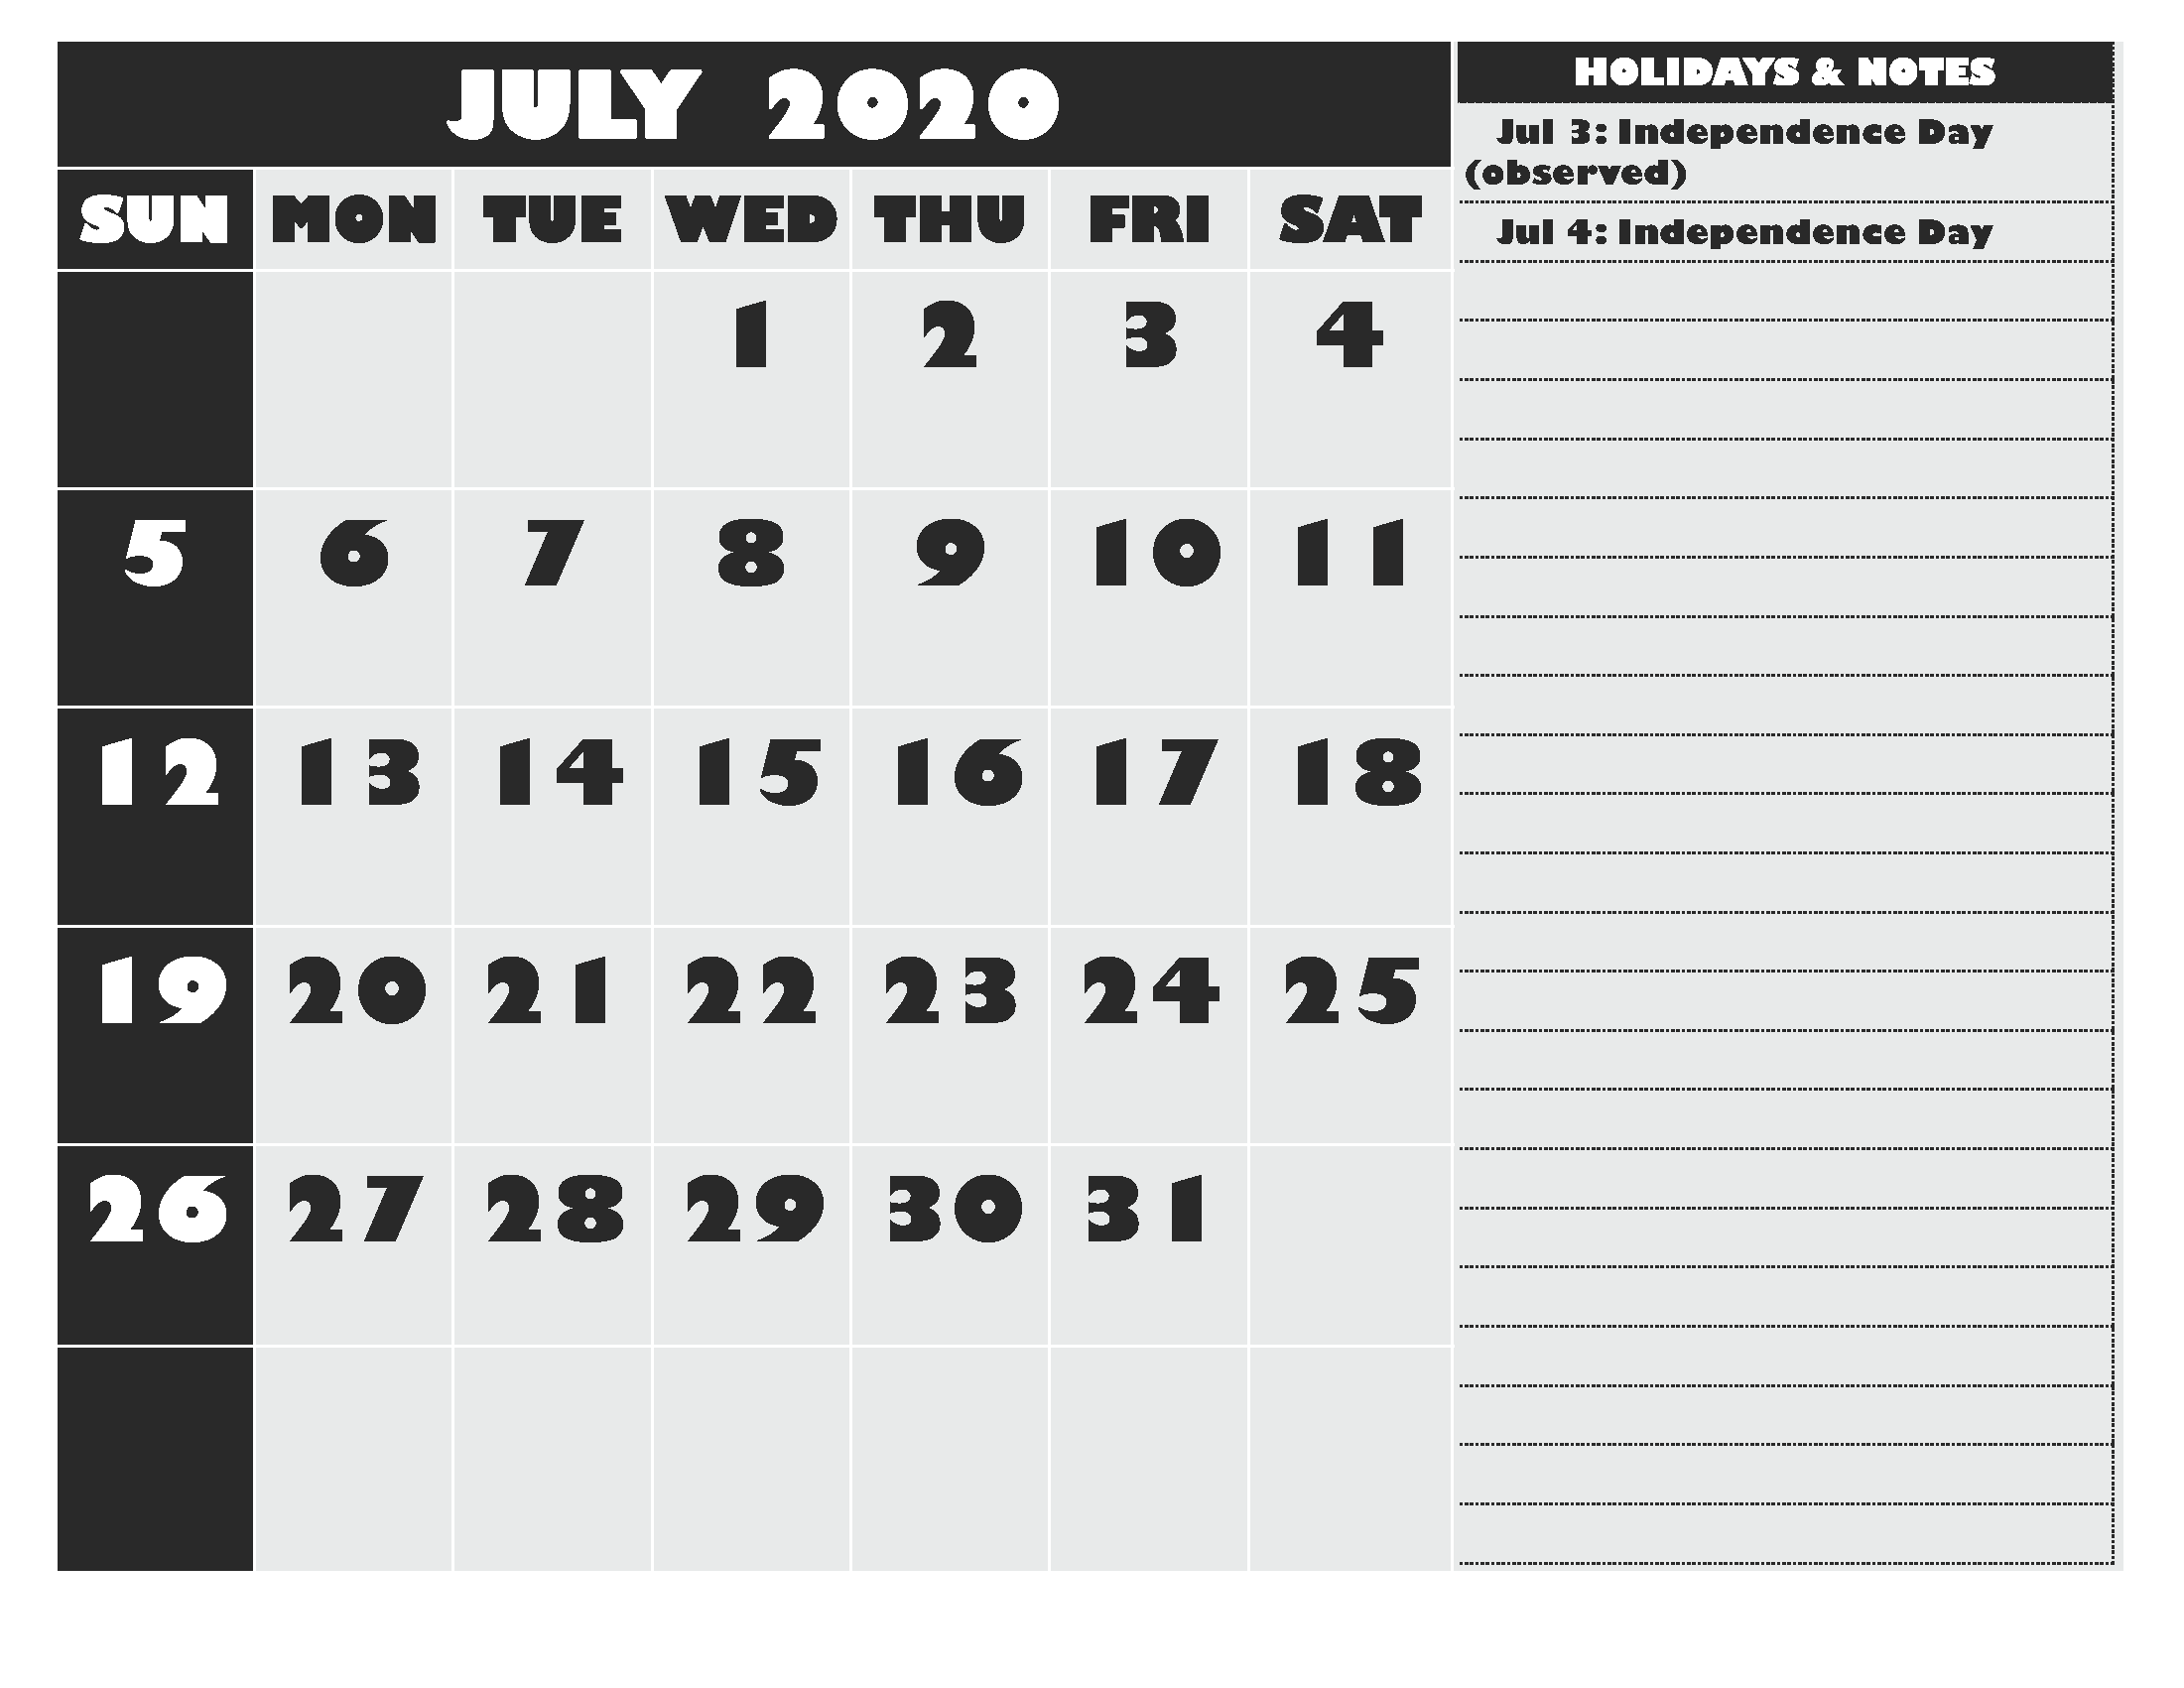 Free Printable July 2020 Calendar with Holidays